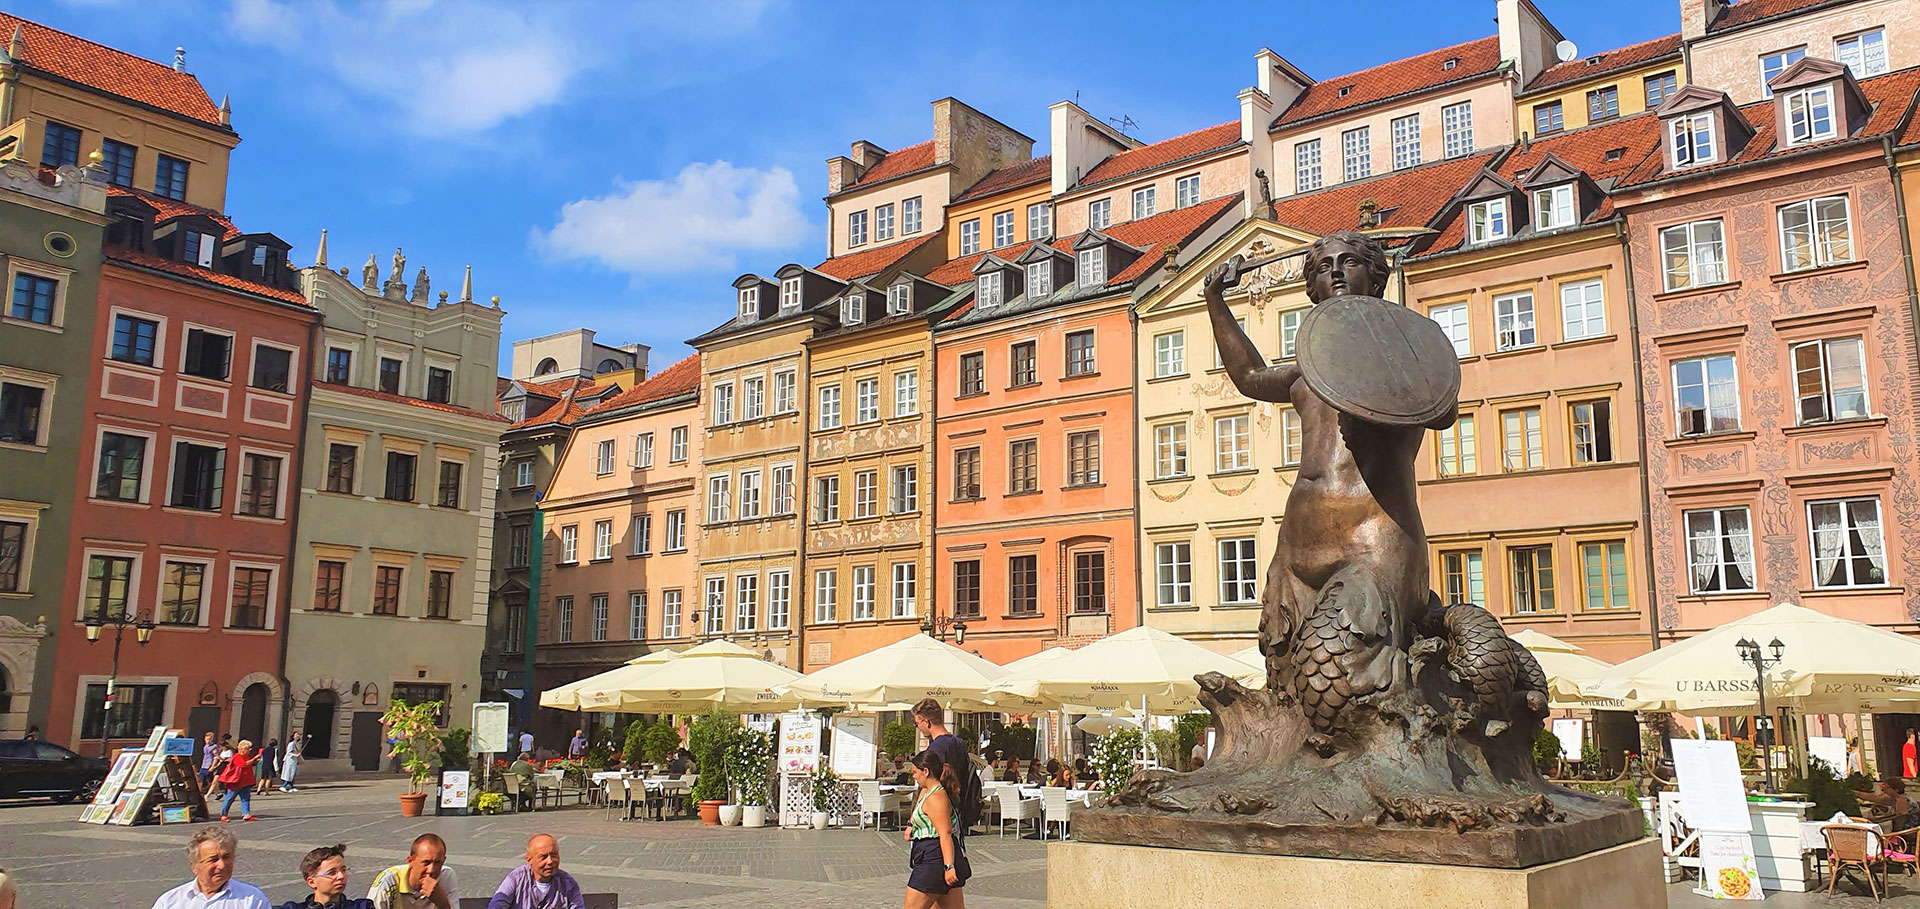 Warsaw Old Town Market Square